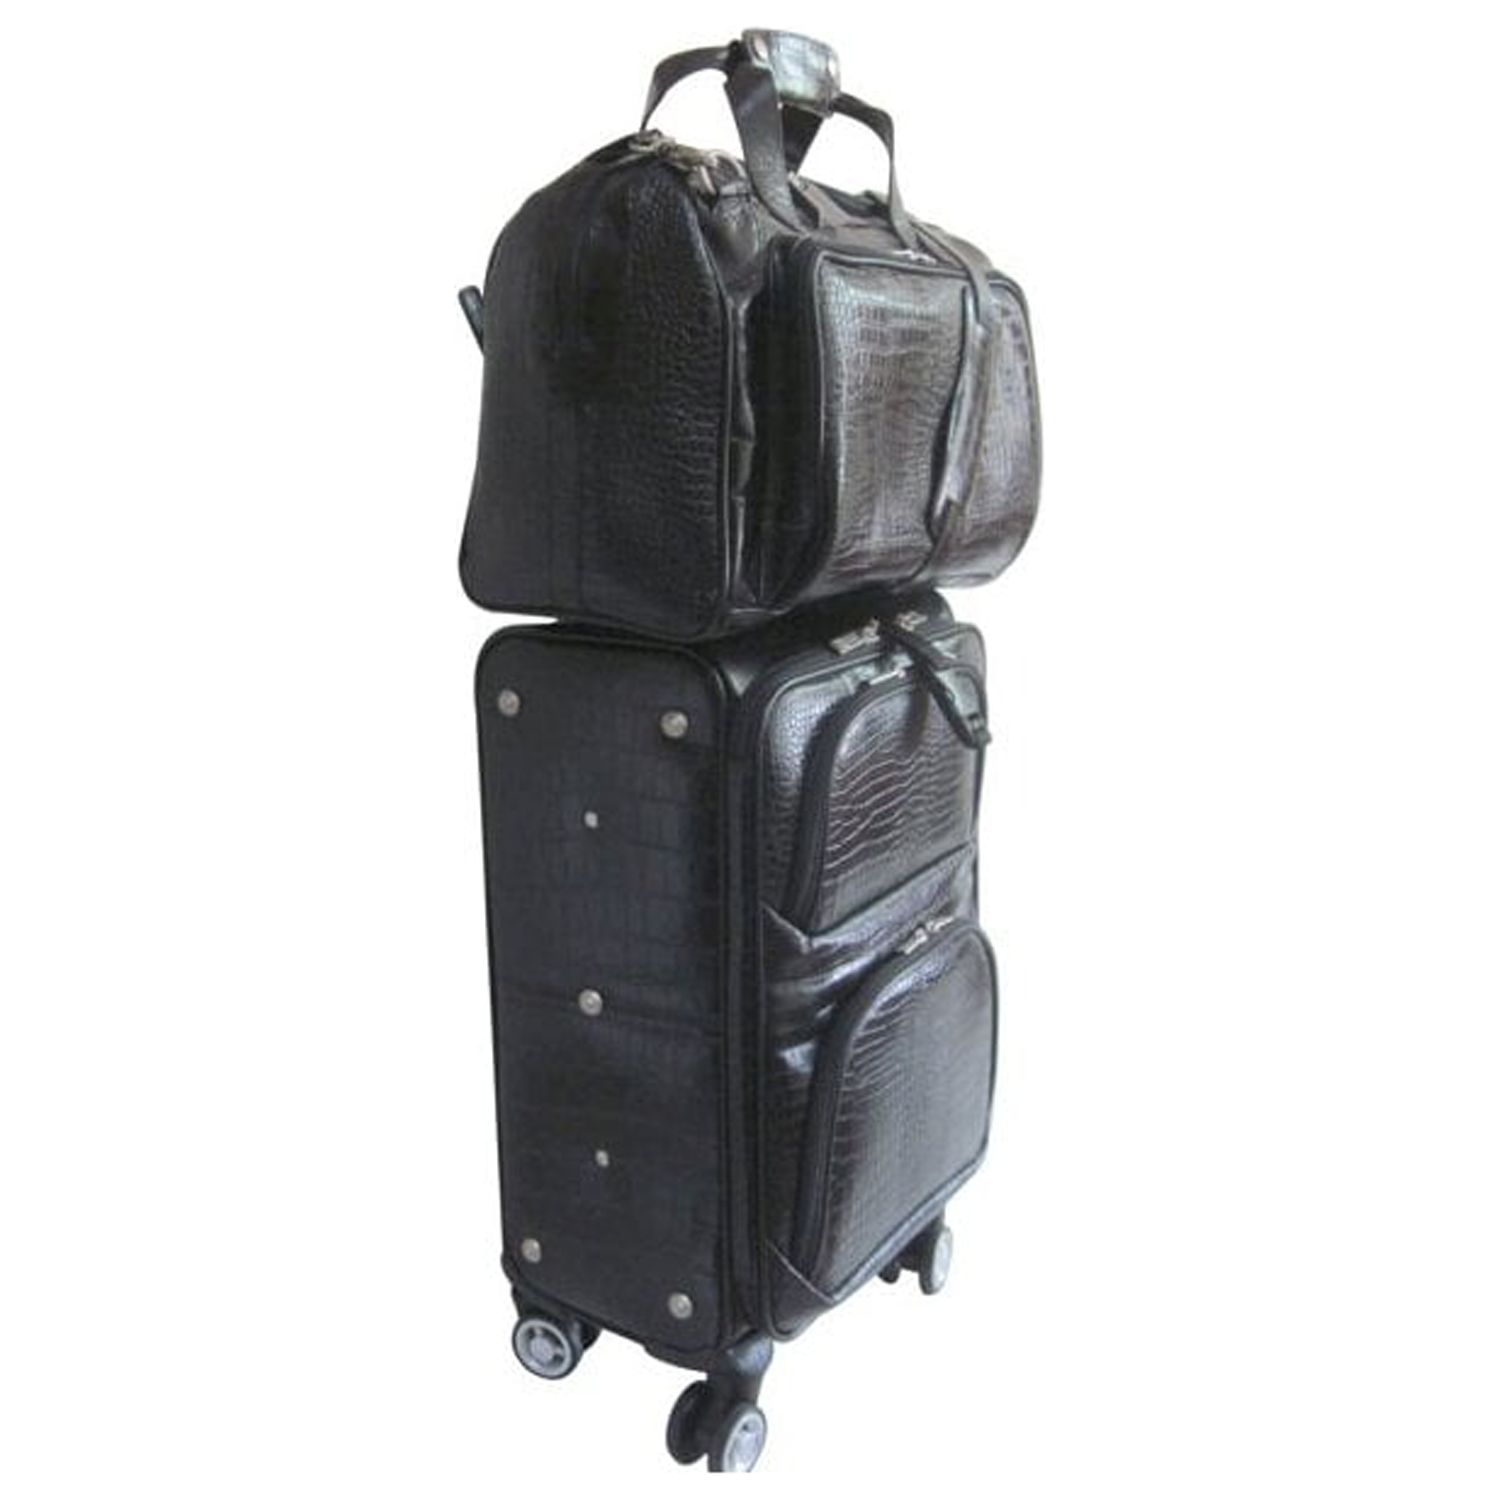 Black Leather Croco-Print 2-Piece Carry-On Spinner Luggage Set - image 3 of 4